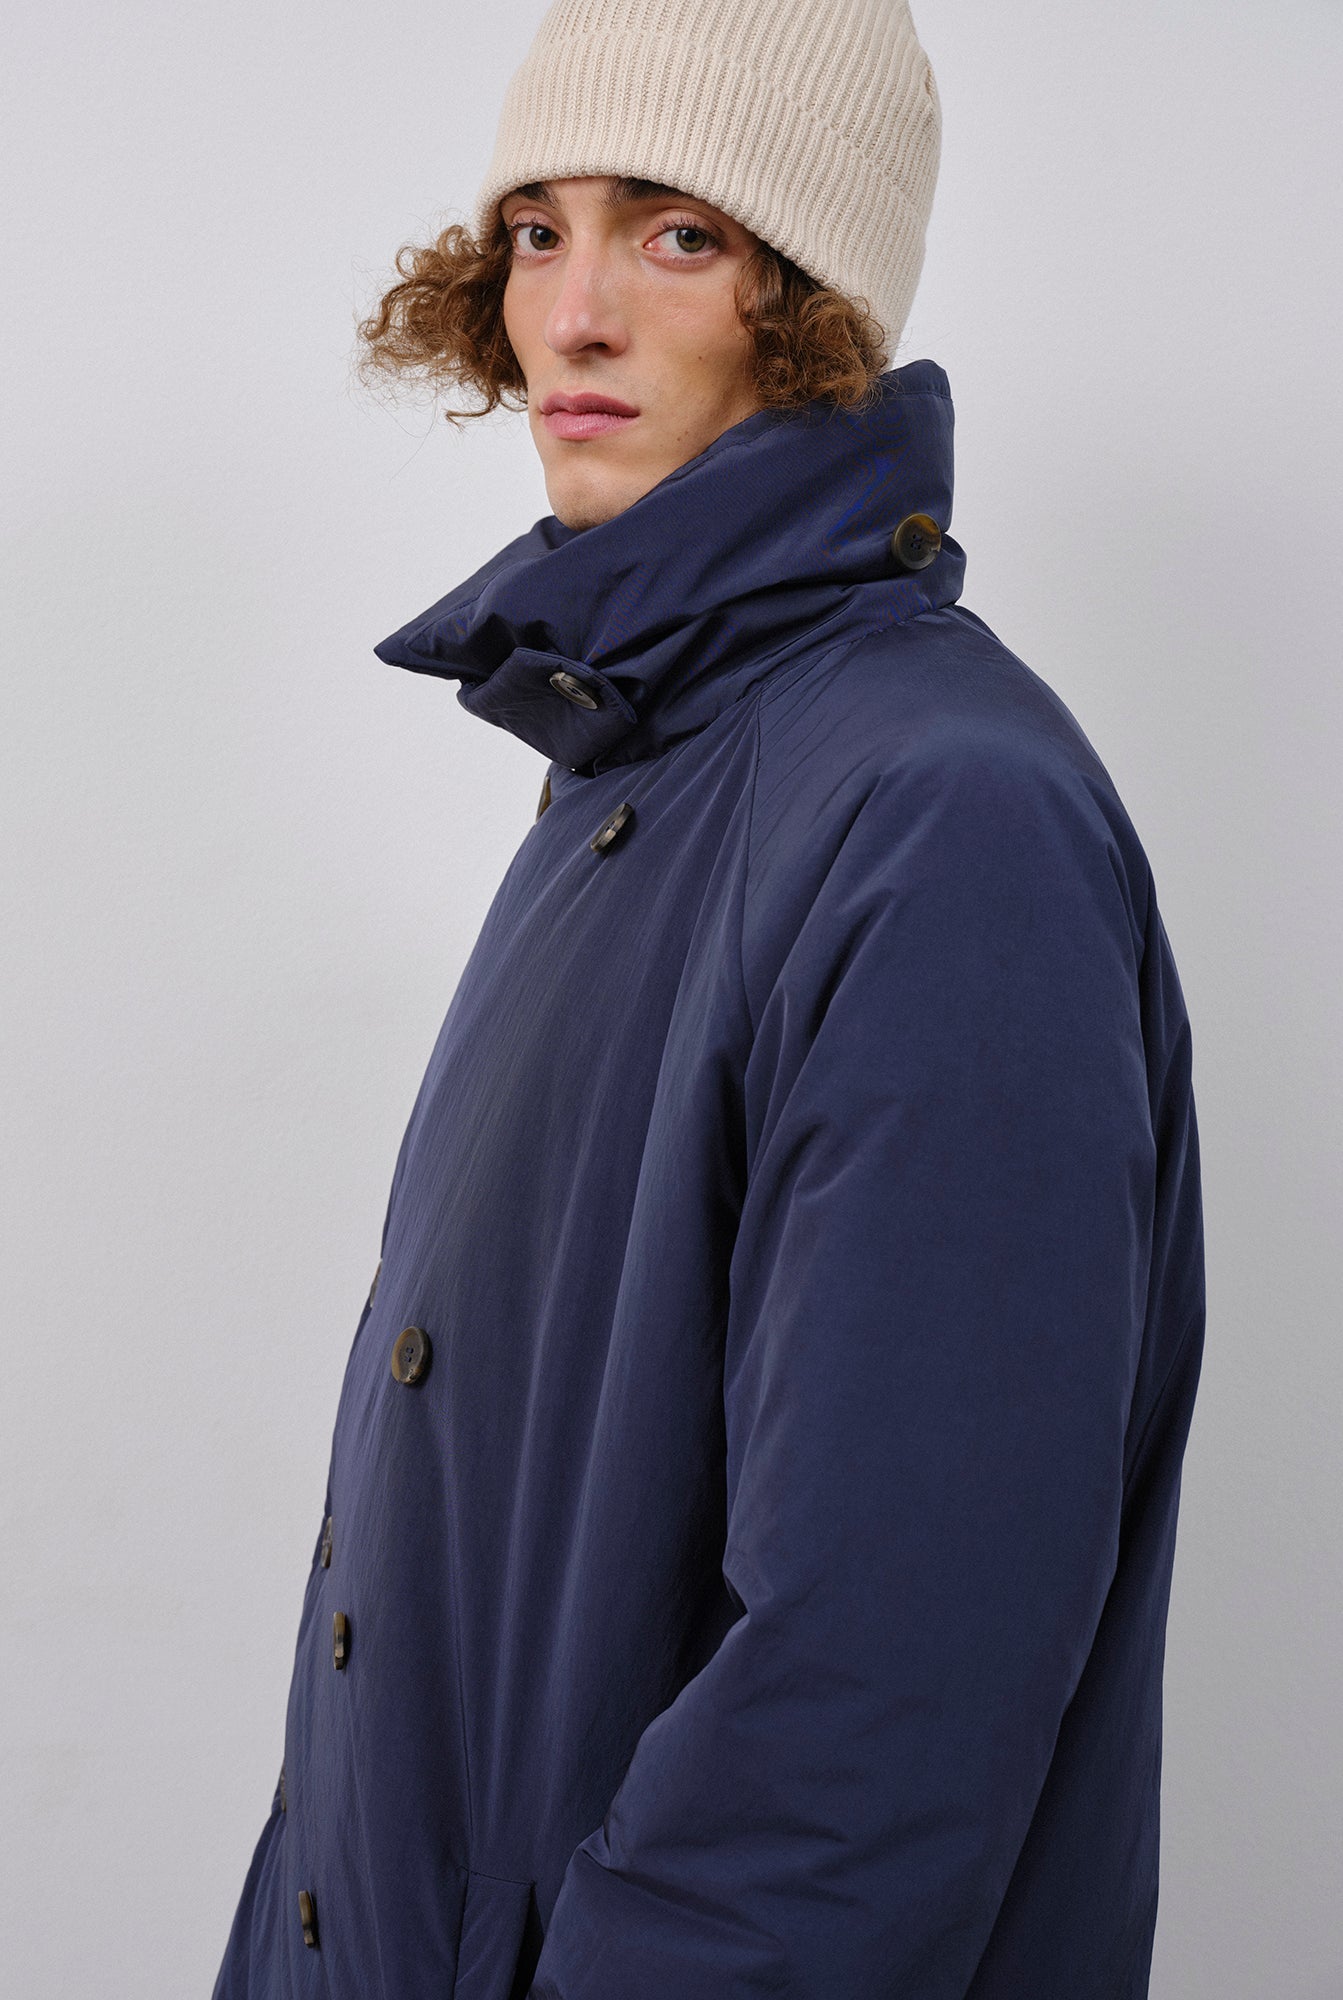 Embassy-of-Bricks-and-Logs-OUTLET-SALE-KINGSGATE-PUFFER-COAT-Jacken-Mantel-ARCHIVE-COLLECTION-3.jpg